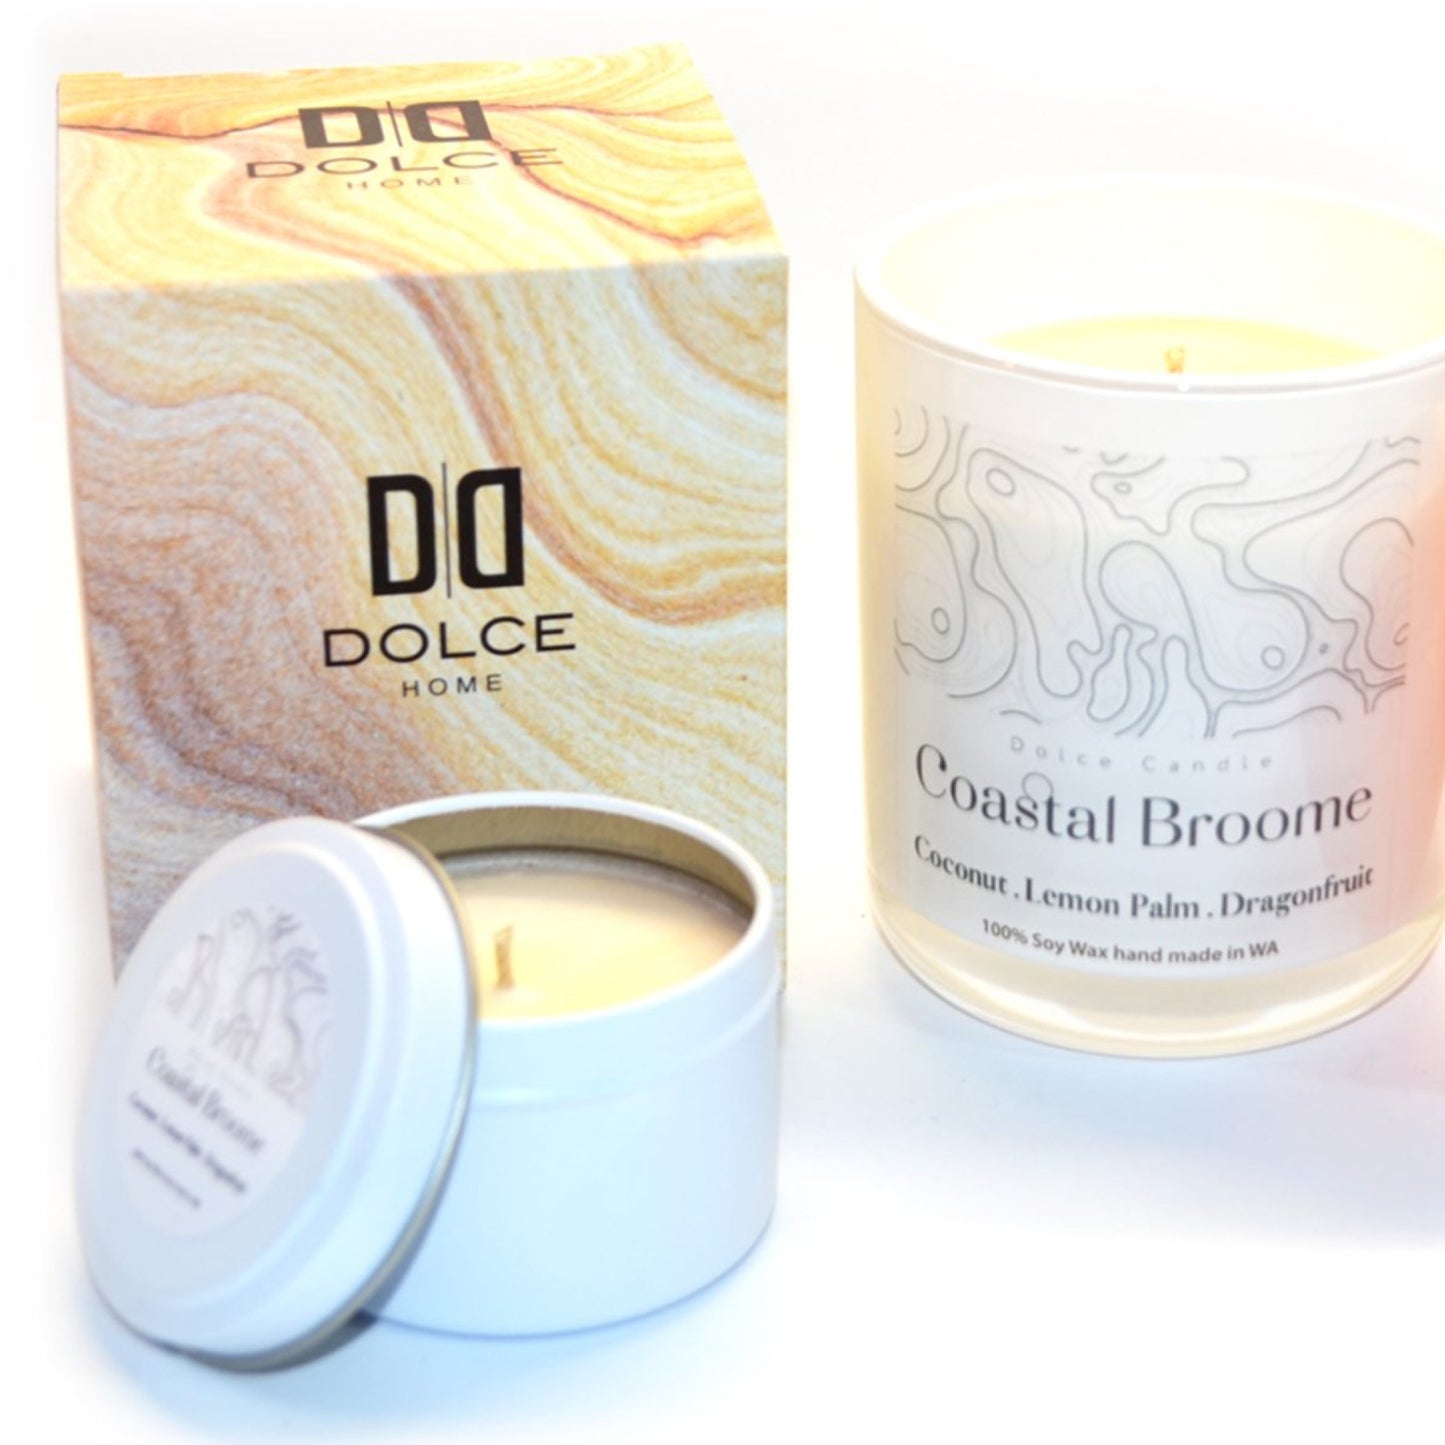 Coastal Broome | 300g Soy Wax Candle | Dolce Home | Handmade in W.A.